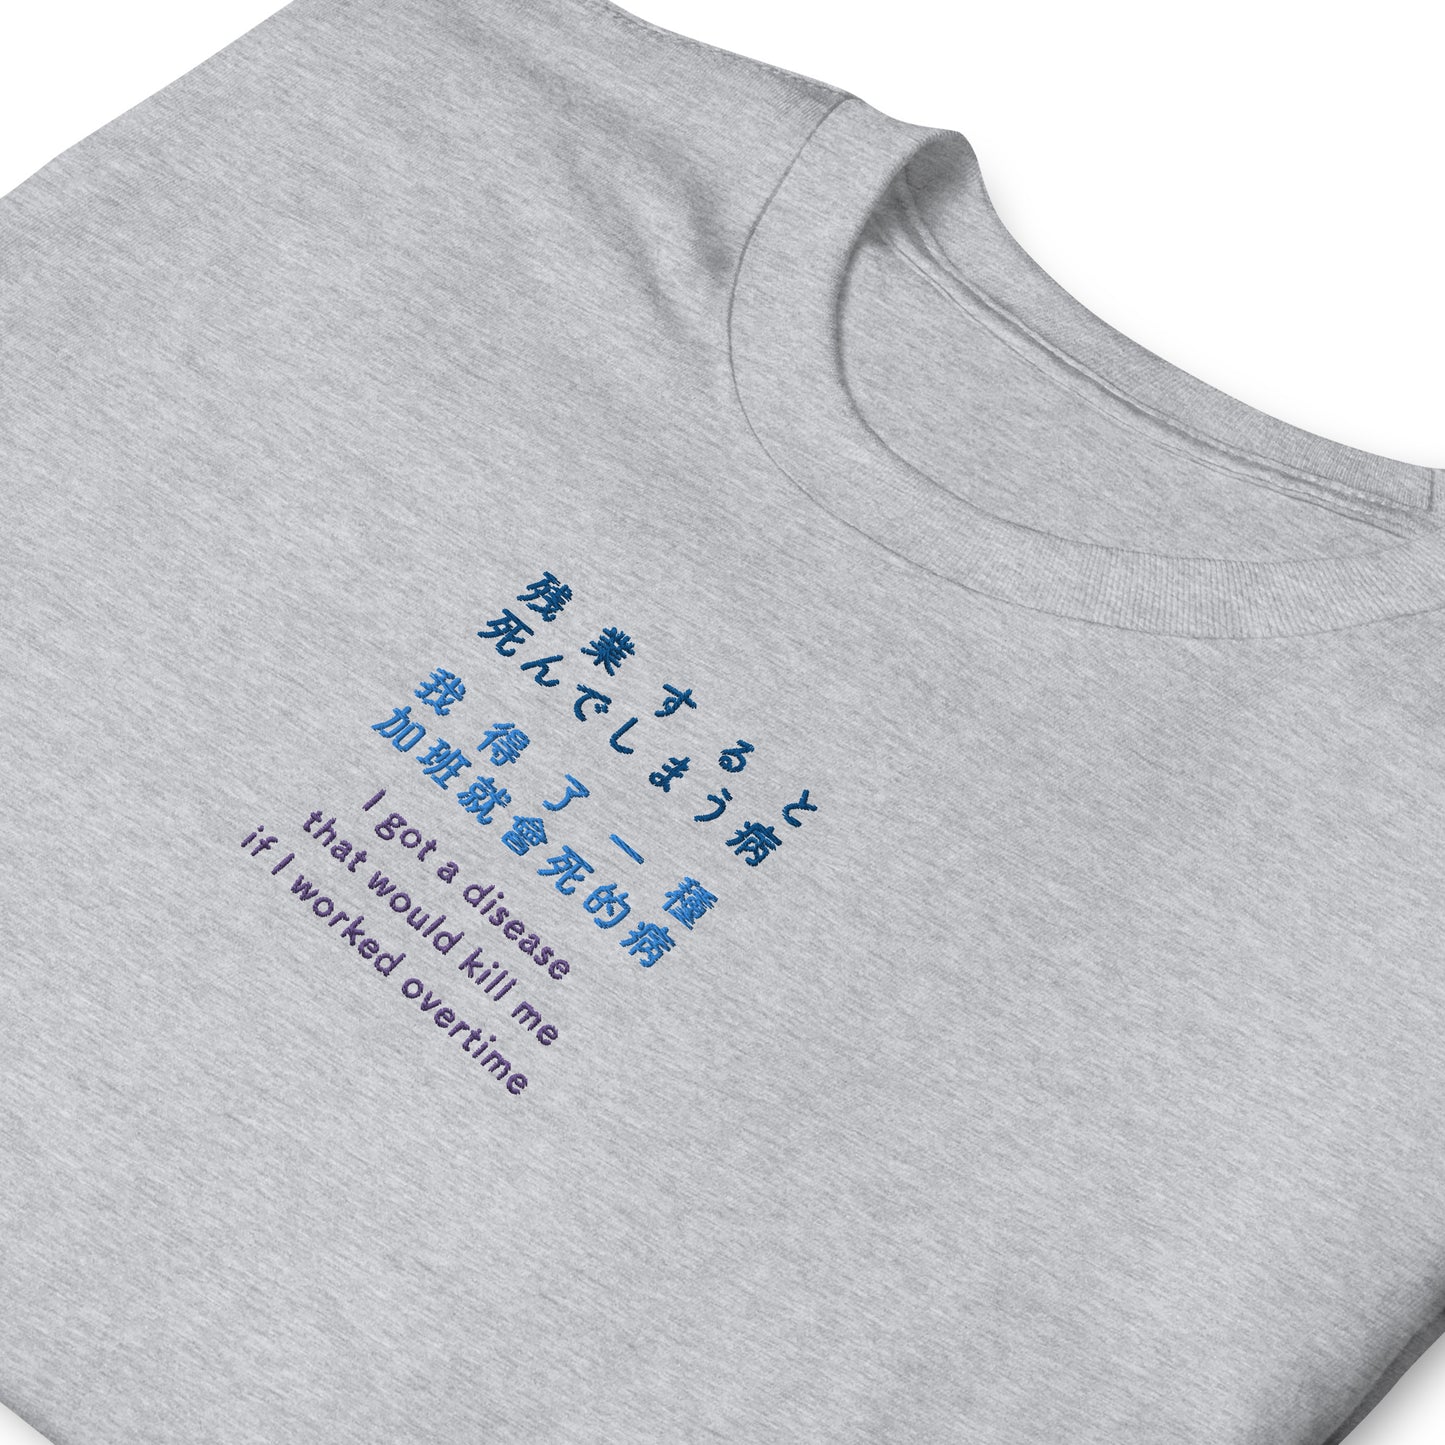 Light Gray High Quality Tee - Front Design with an Navy, Light Blue, Purple Embroidery "i got a disease that would kill me if i worked overtime" in Japanese,Chinese and English